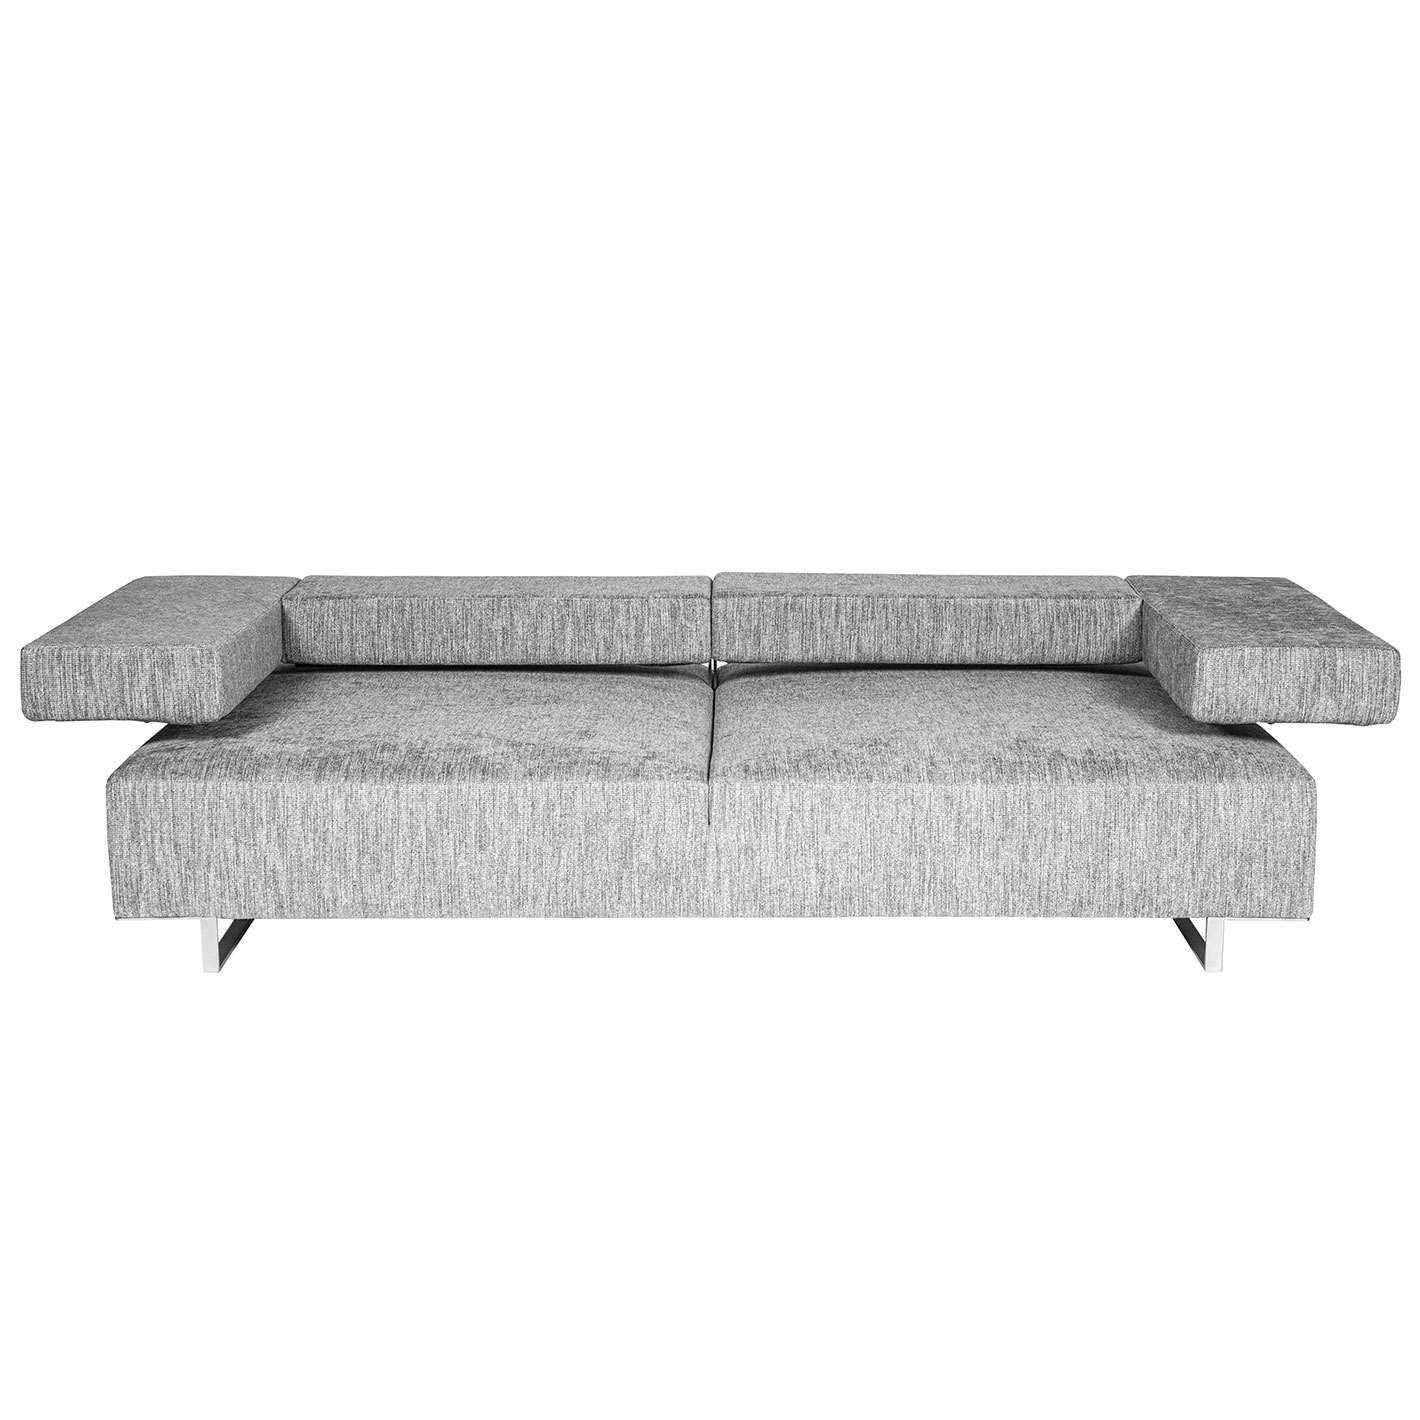 Sofas im Outlet - LOFT OUTLET Einzelsofa